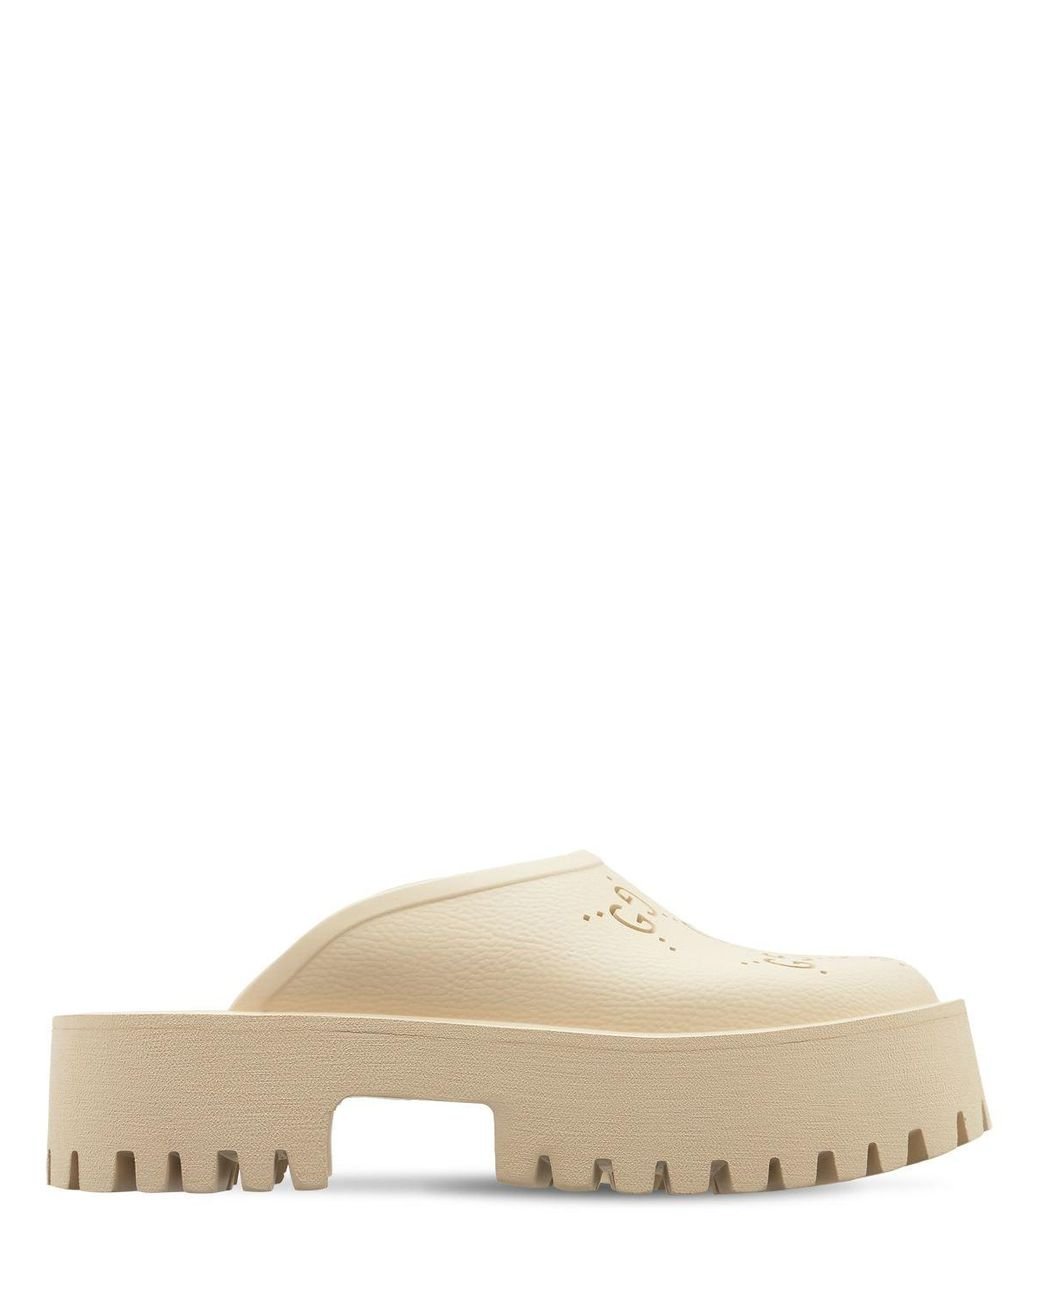 Gucci 55mm Elea Perforated G Platform Sandals in Natural | Lyst